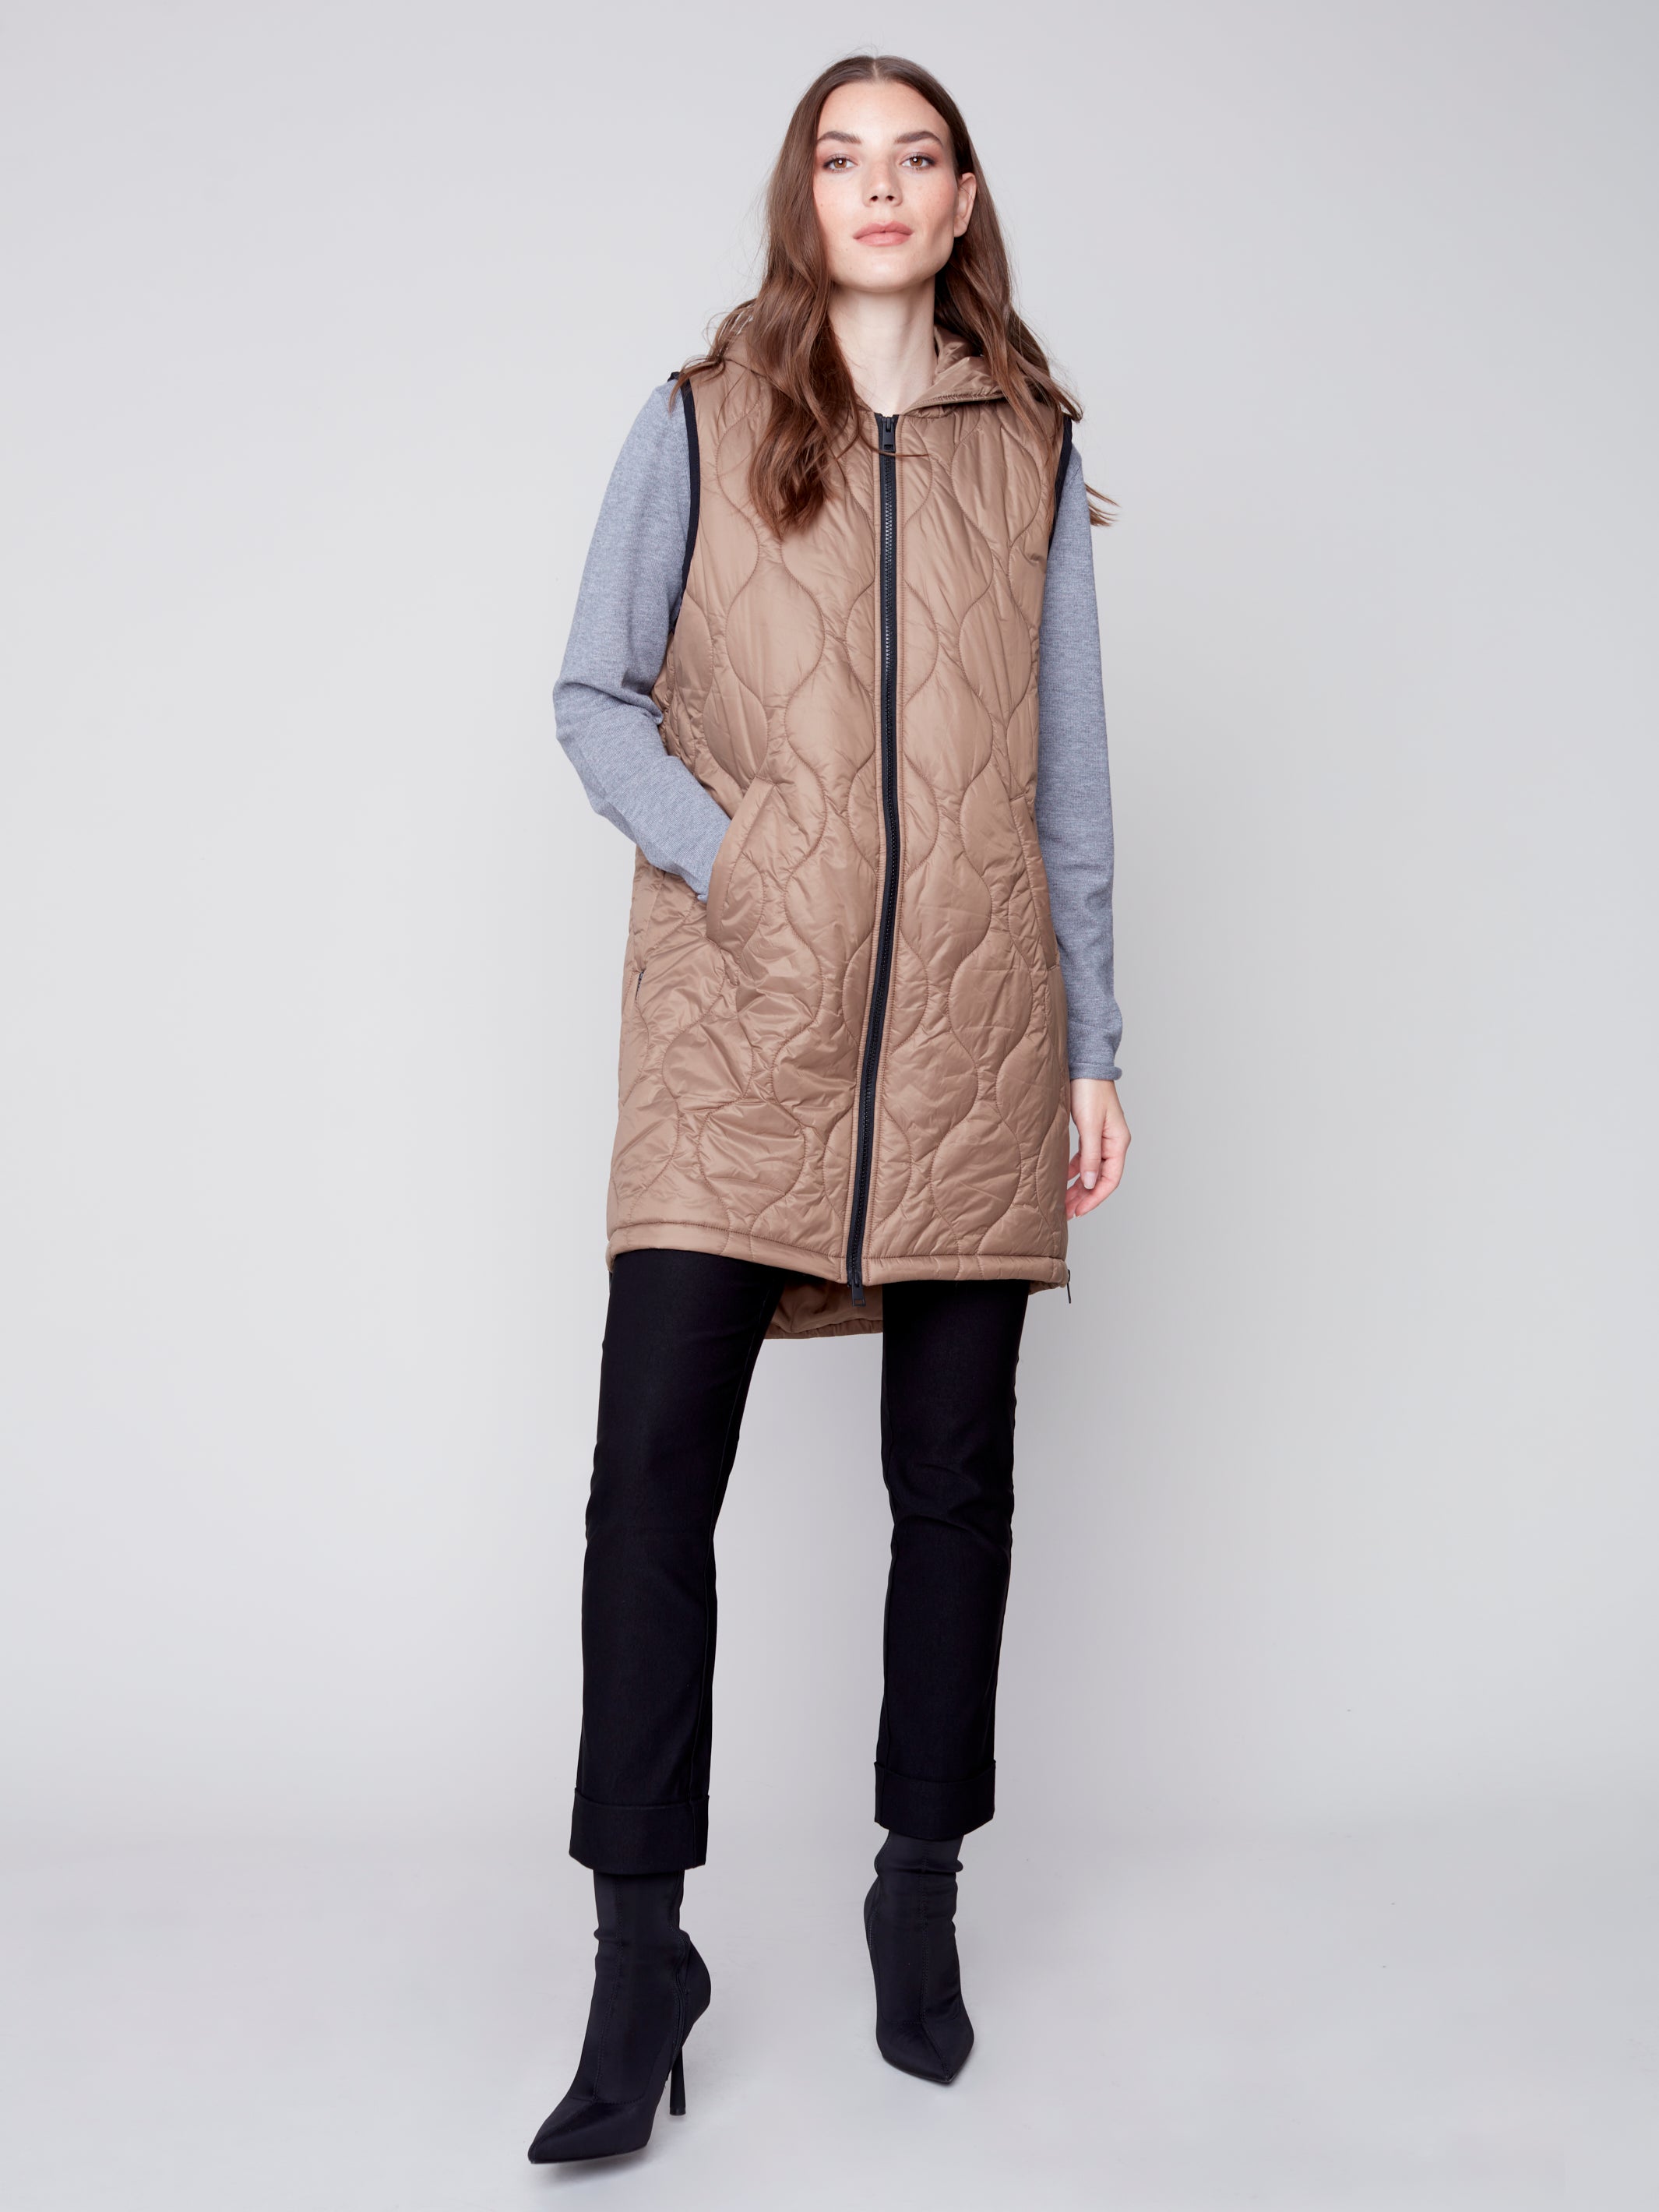 Hooded Long Sleeve Quilted Vest C6268/388B 524